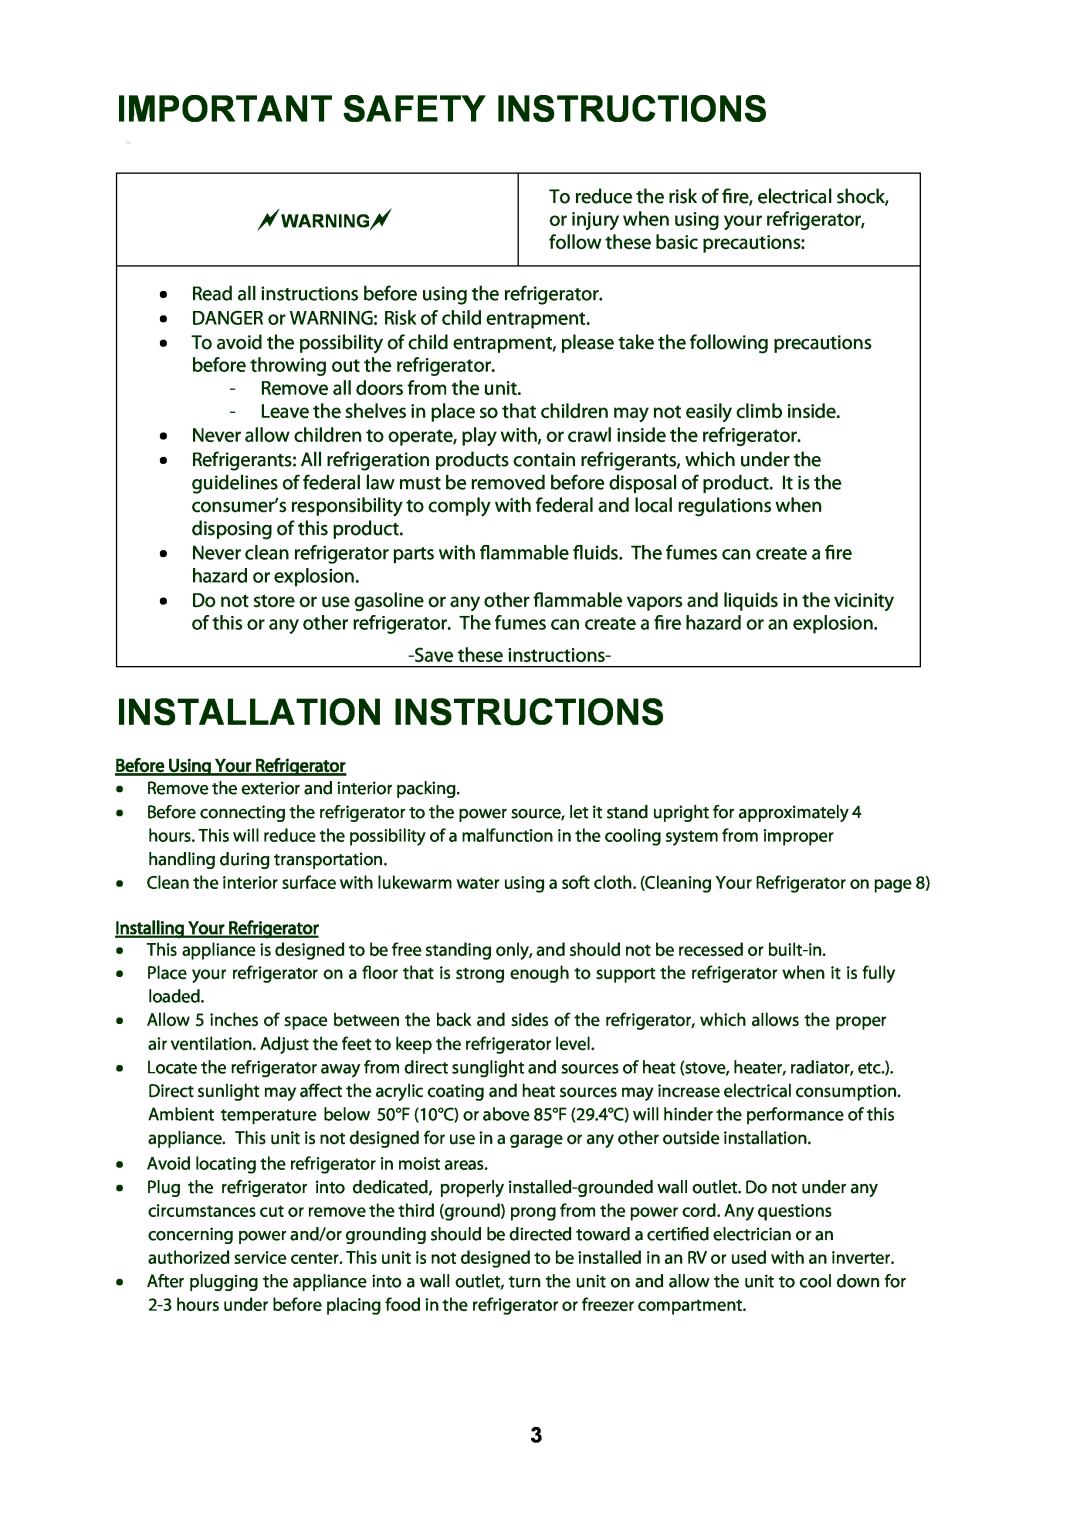 Oster OSDR325B1, Oster 3.25 CU. FT. Refrigerator instruction manual Important Safety Instructions, Installation Instructions 